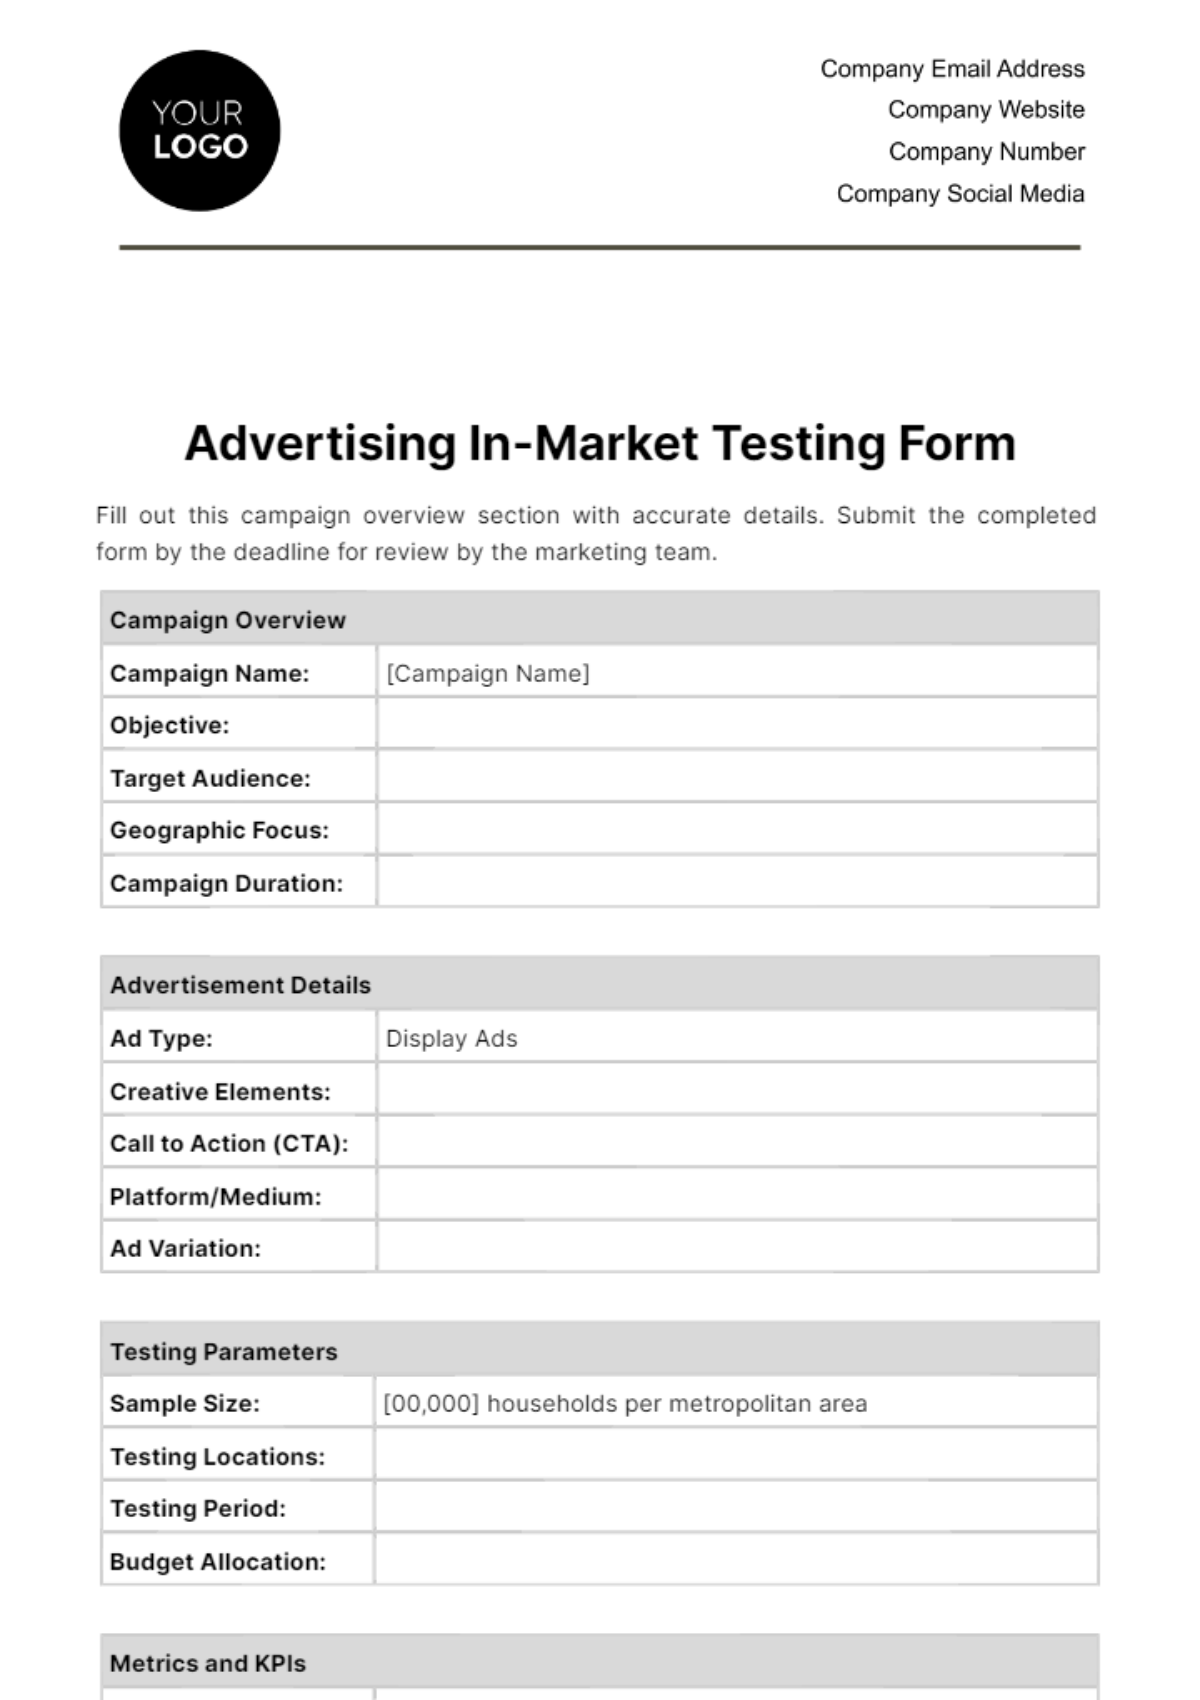 Advertising In-Market Testing Form Template